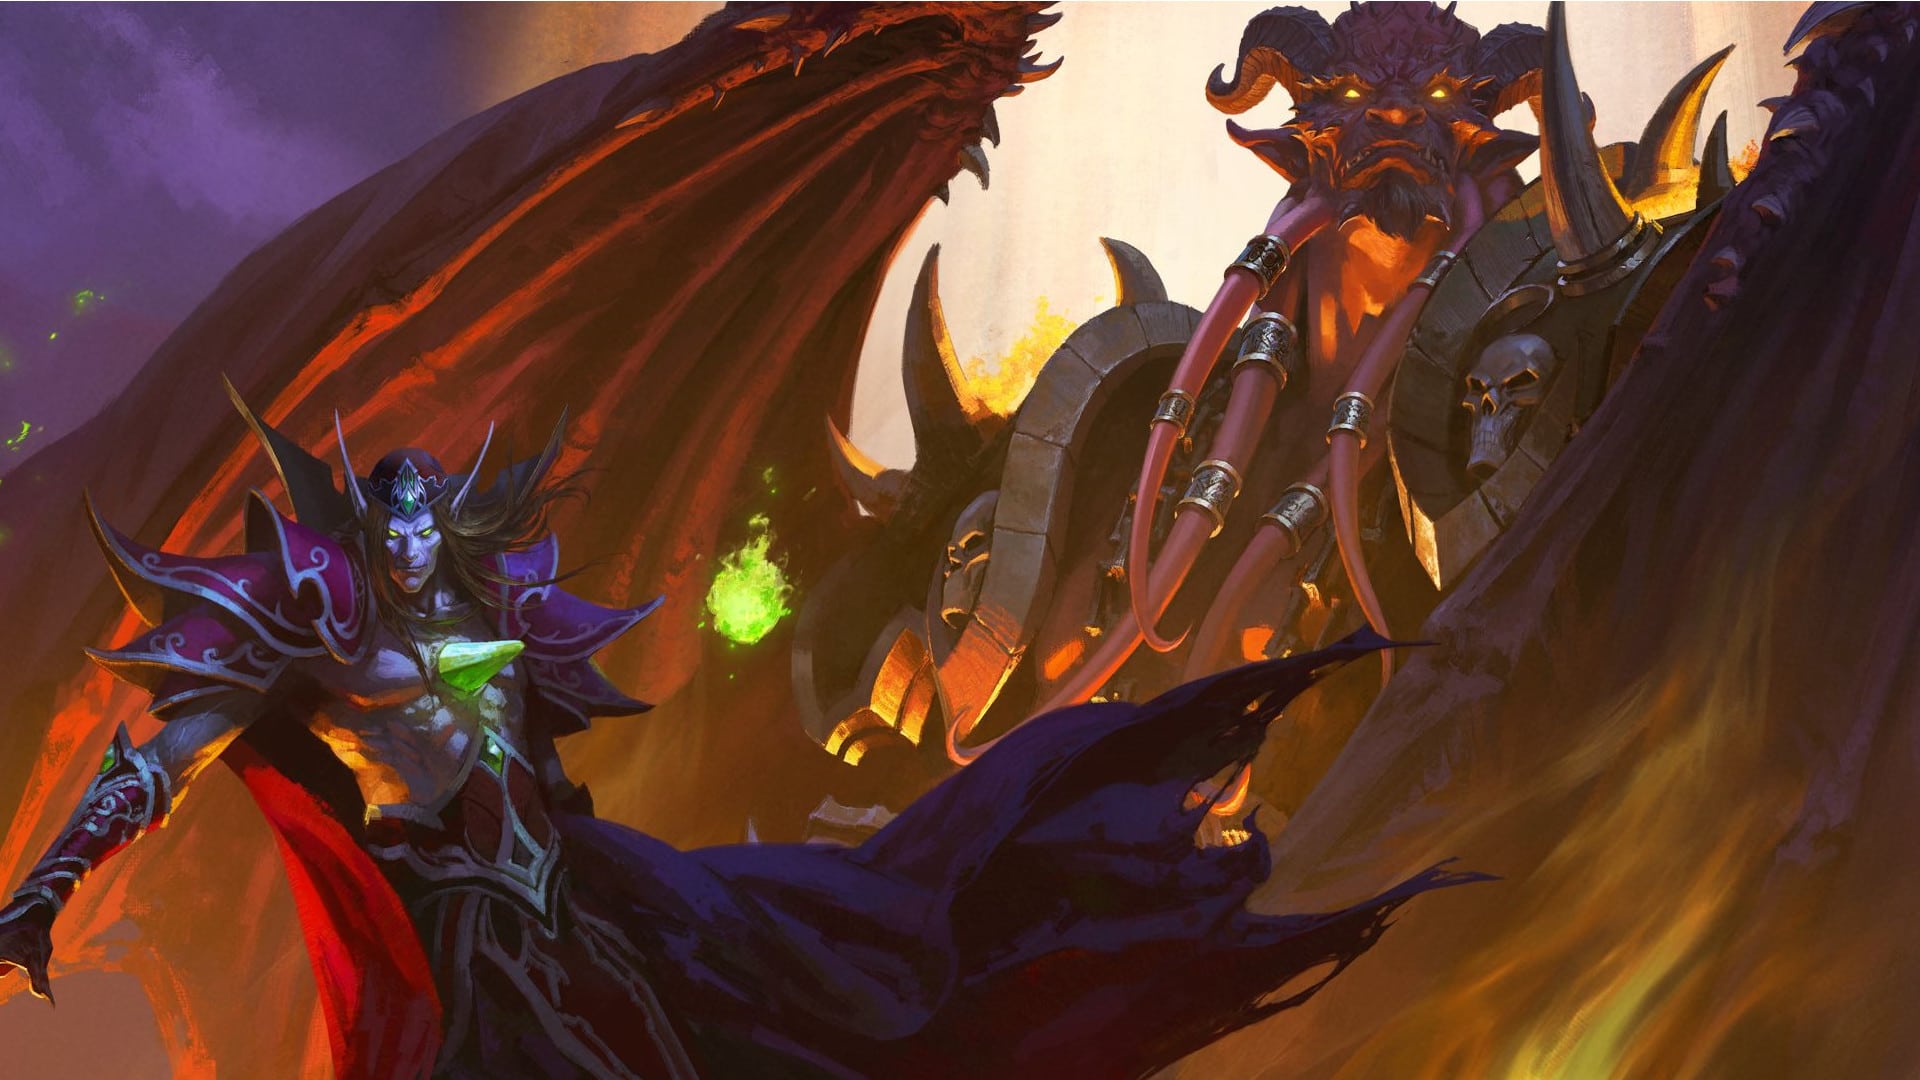 In 2008 it took 62 days for the final boss in WoW to die after an epic fight - today it takes 52 minutes to knock him down